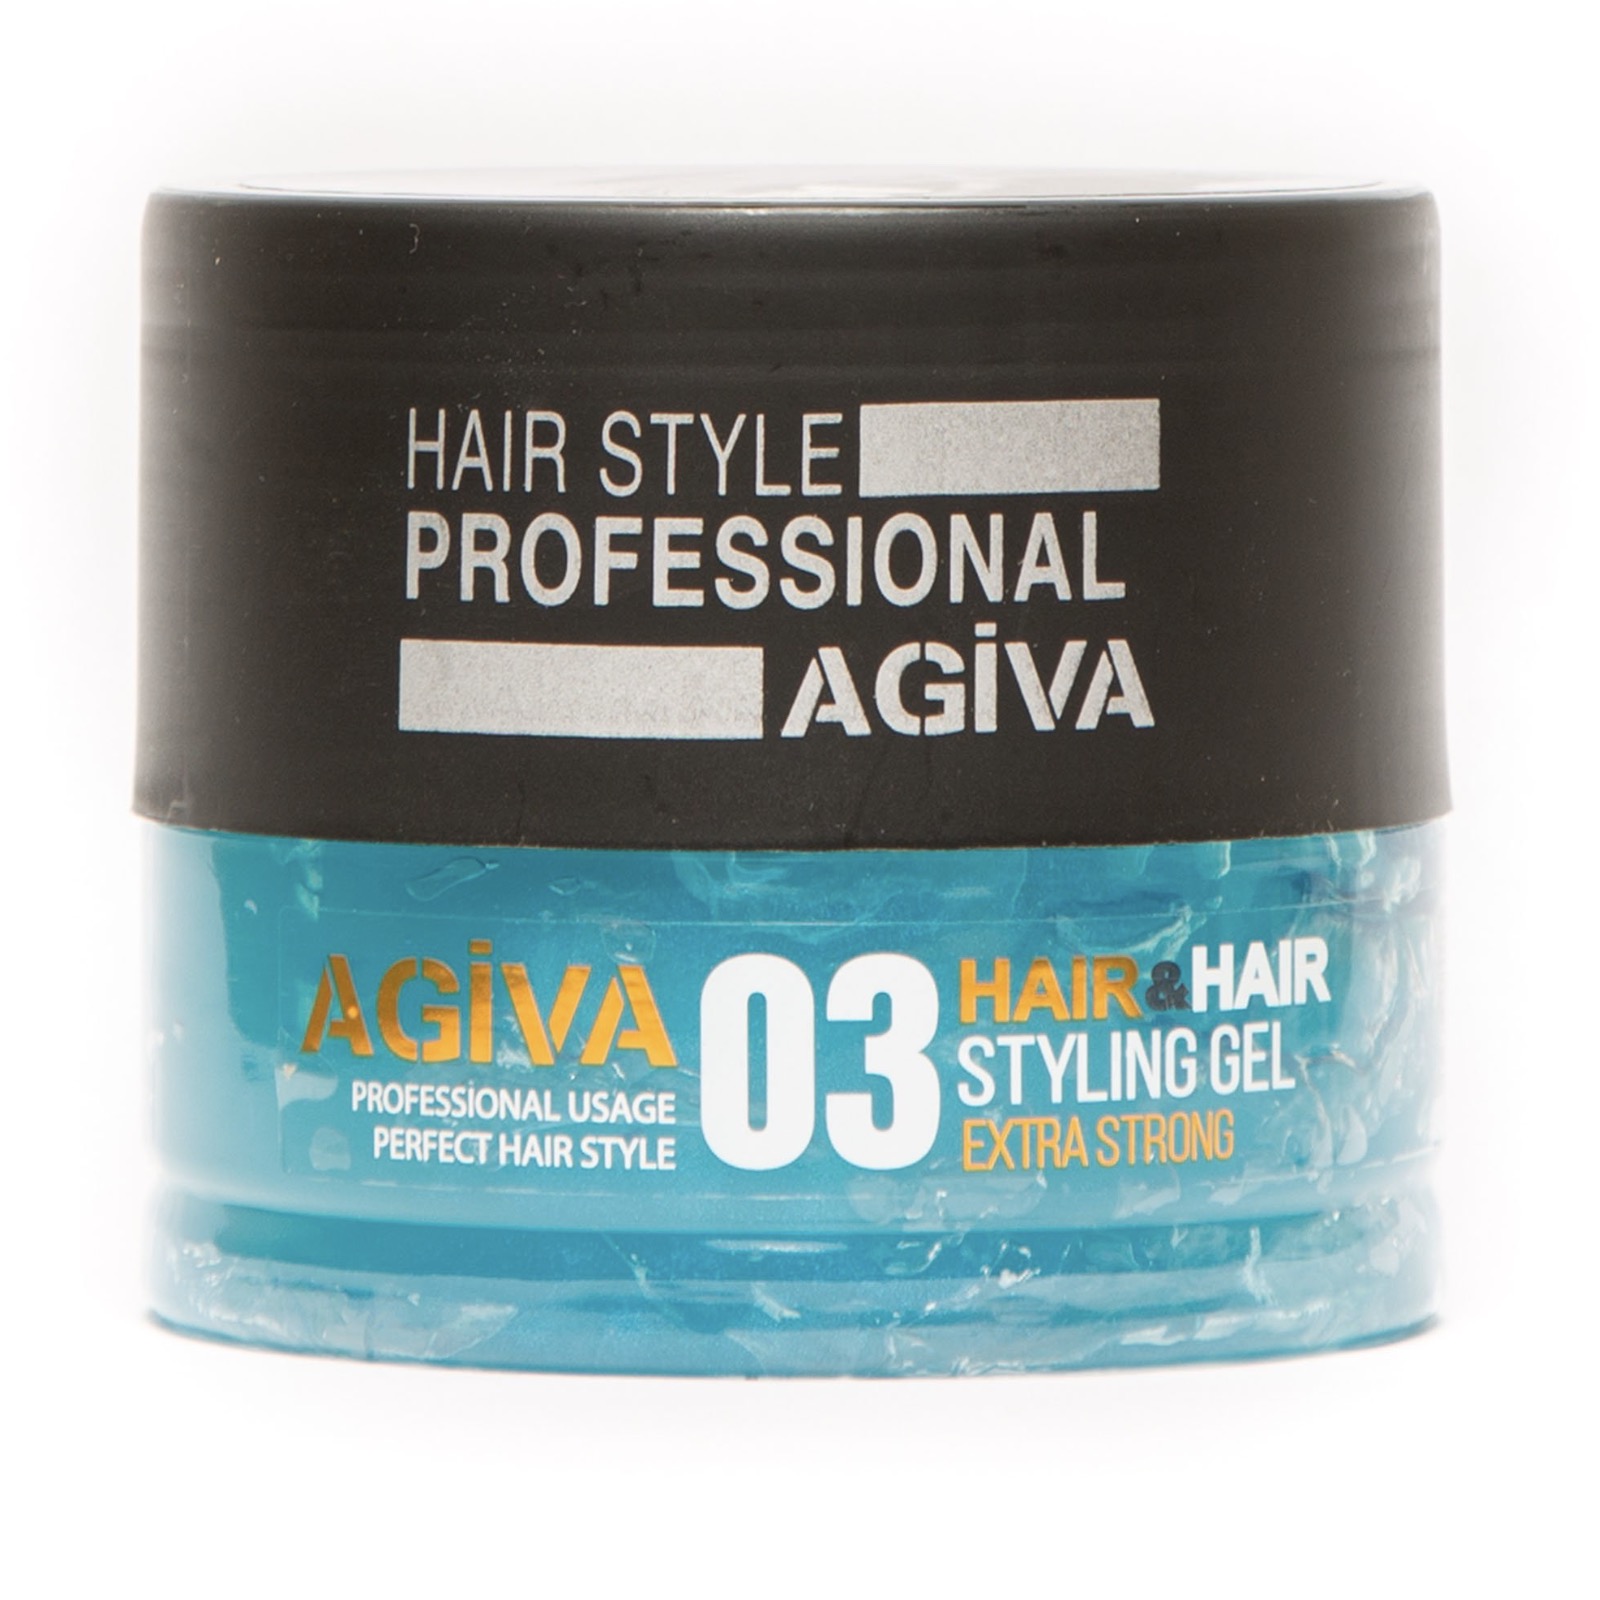 AGIVA Hair Styling Gel 03 Wet Look Extra Strong Hold 700 ml